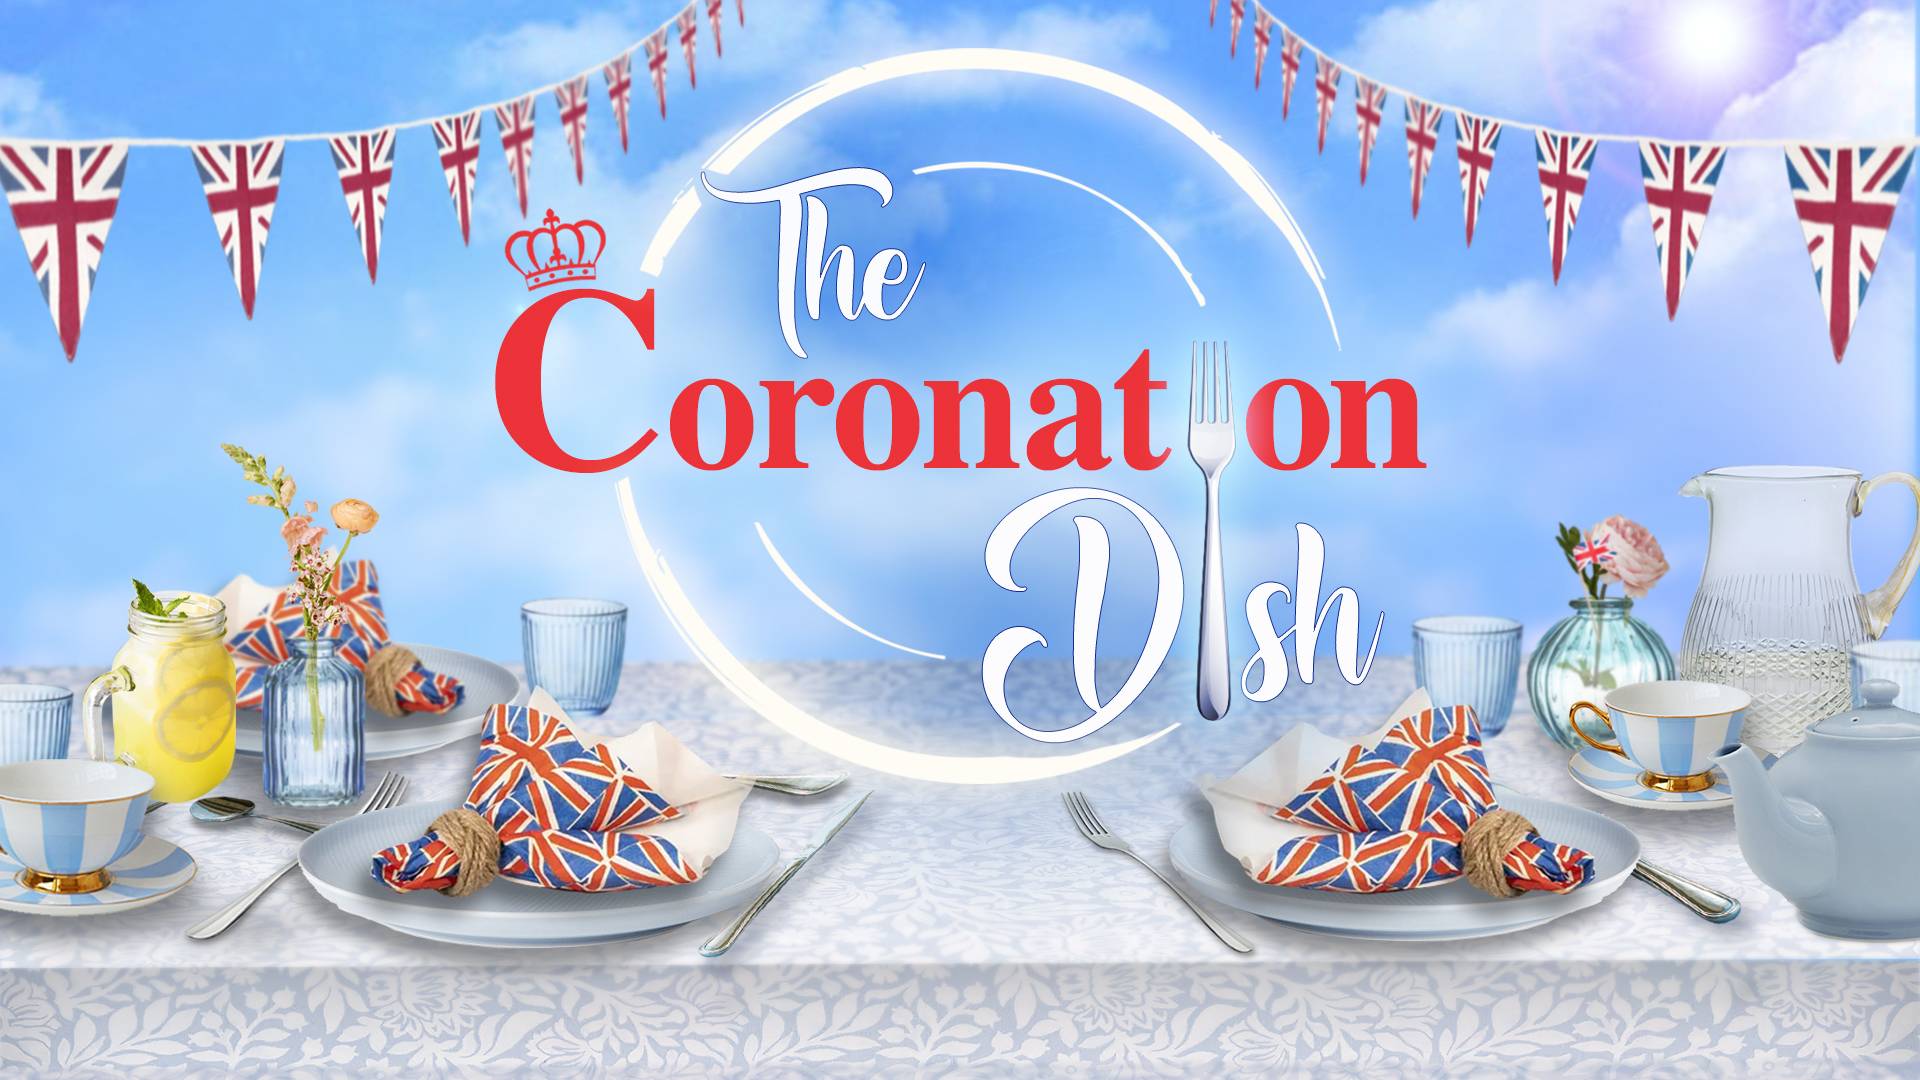 The Coronation Dish logo from The One Show